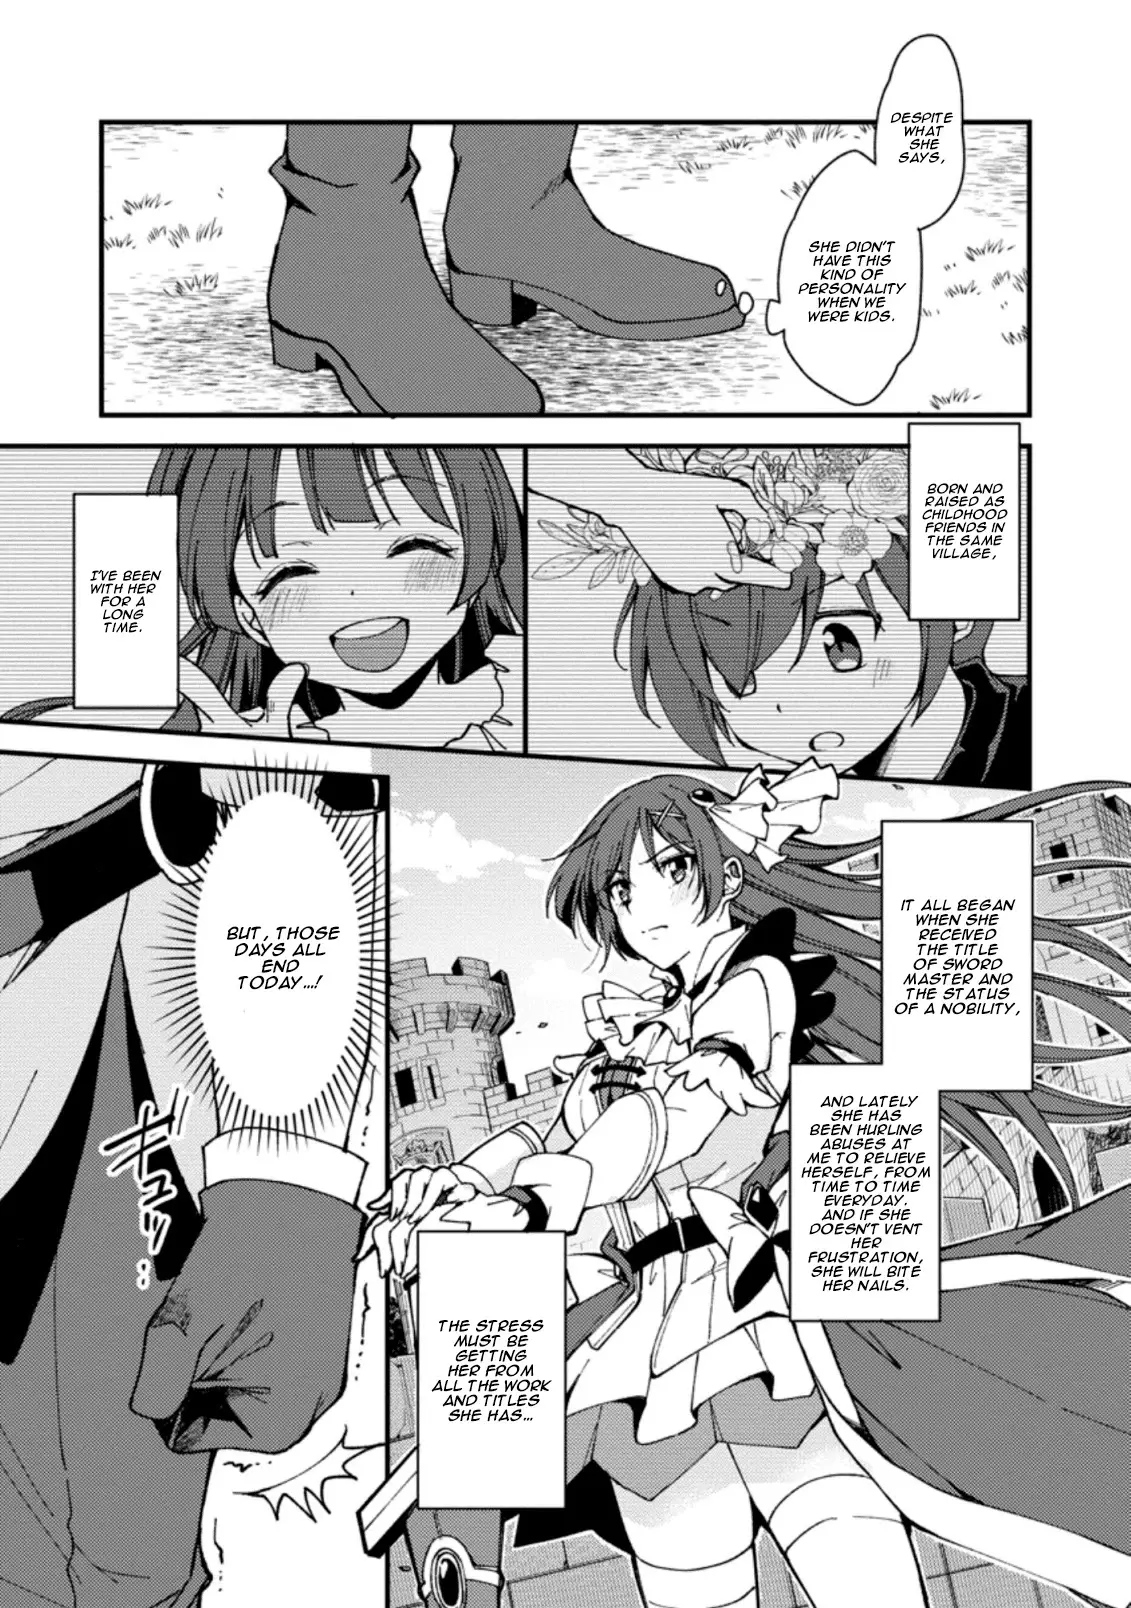 A Sword Master Childhood Friend Power Harassed Me Harshly, So I Broke Off Our Relationship And Make A Fresh Start At The Frontier As A Magic Swordsman. - 1 page 8